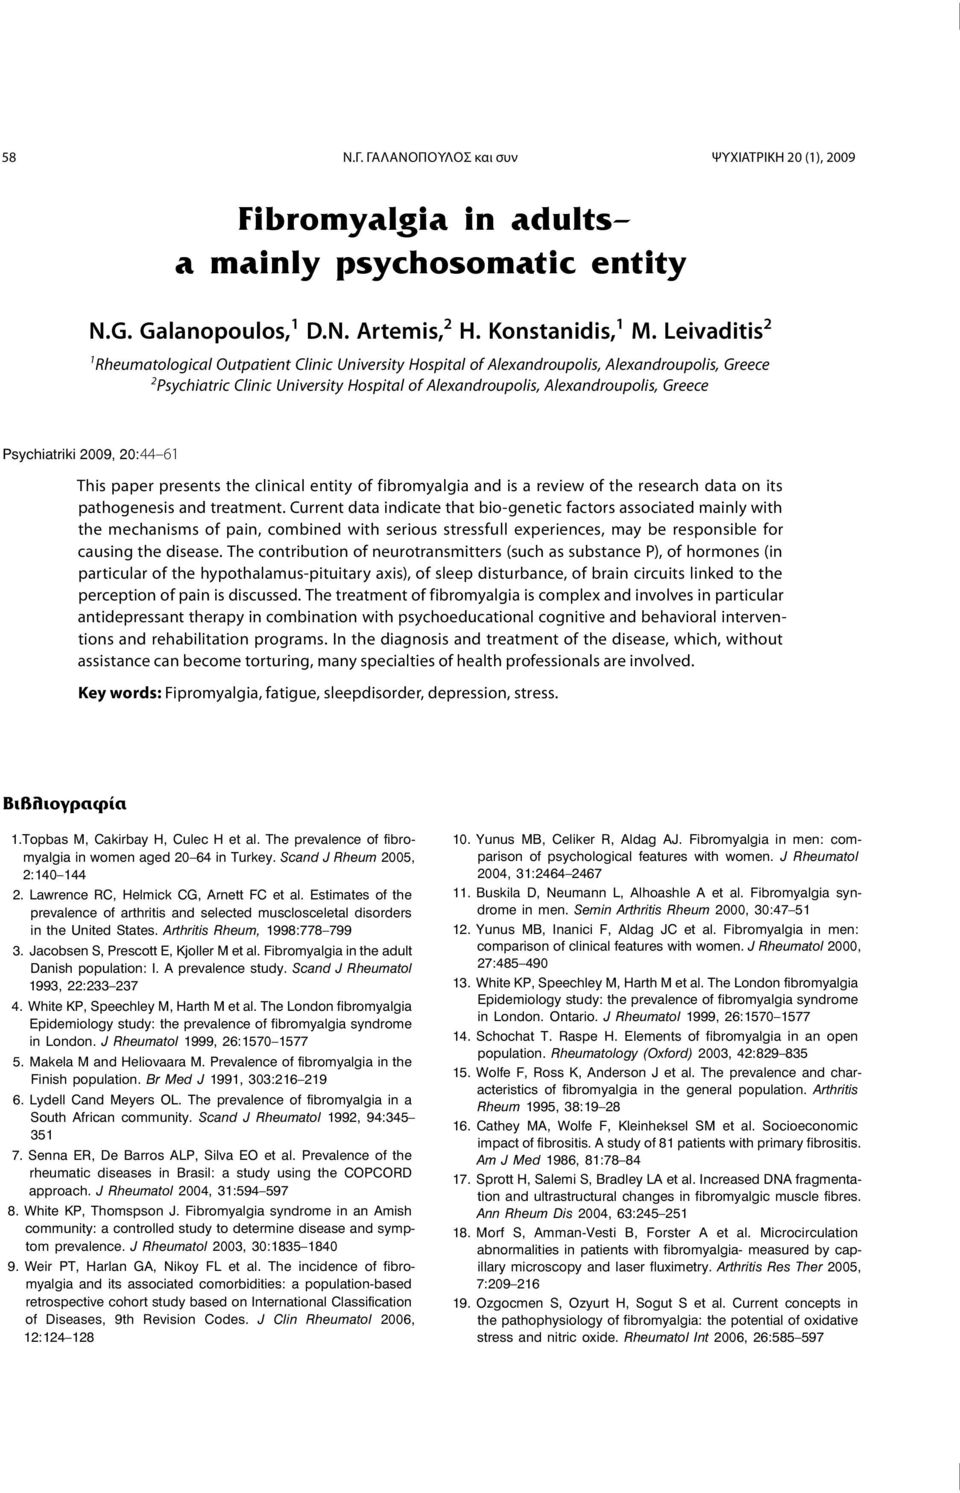 Psychiatriki 2009, 20:44 61 This paper presents the clinical entity of fibromyalgia and is a review of the research data on its pathogenesis and treatment.